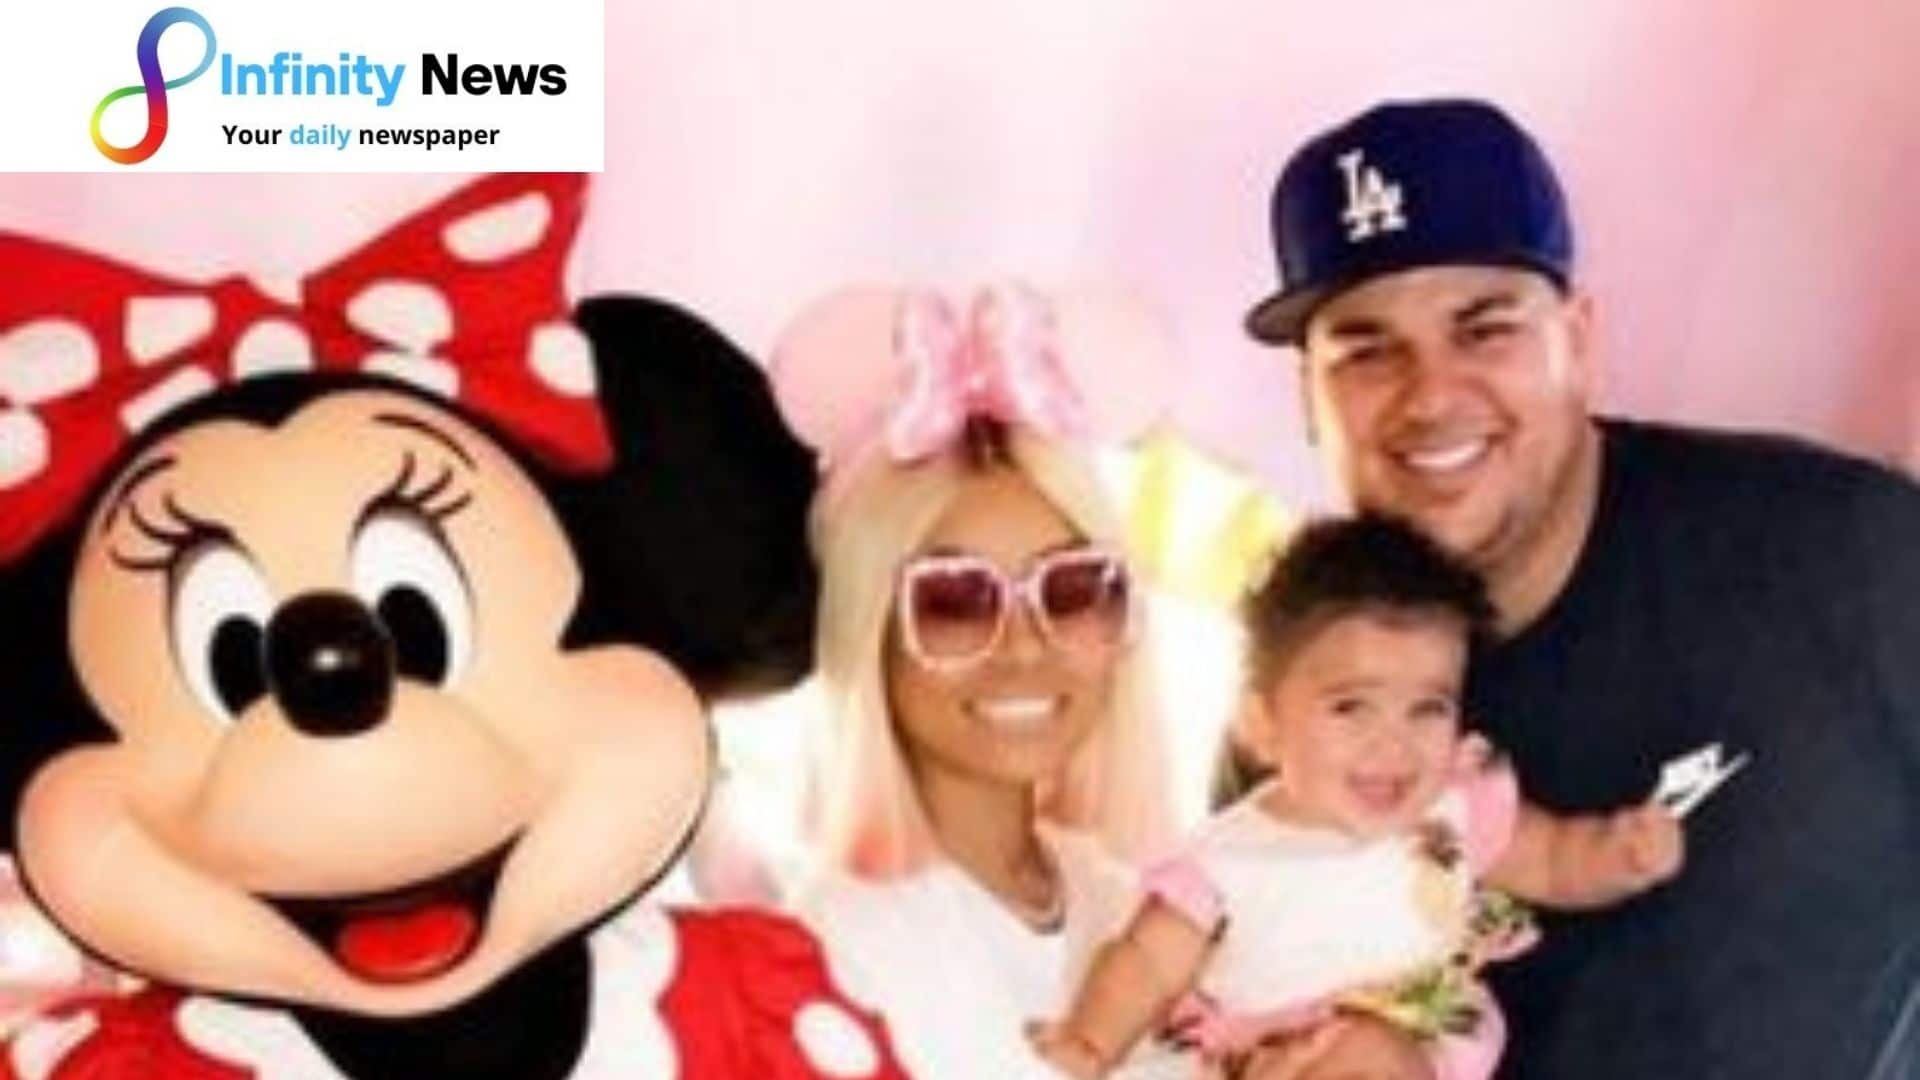 Rob Kardashian claims he didn't adore Blac Chyna as he gives testimony in the court case